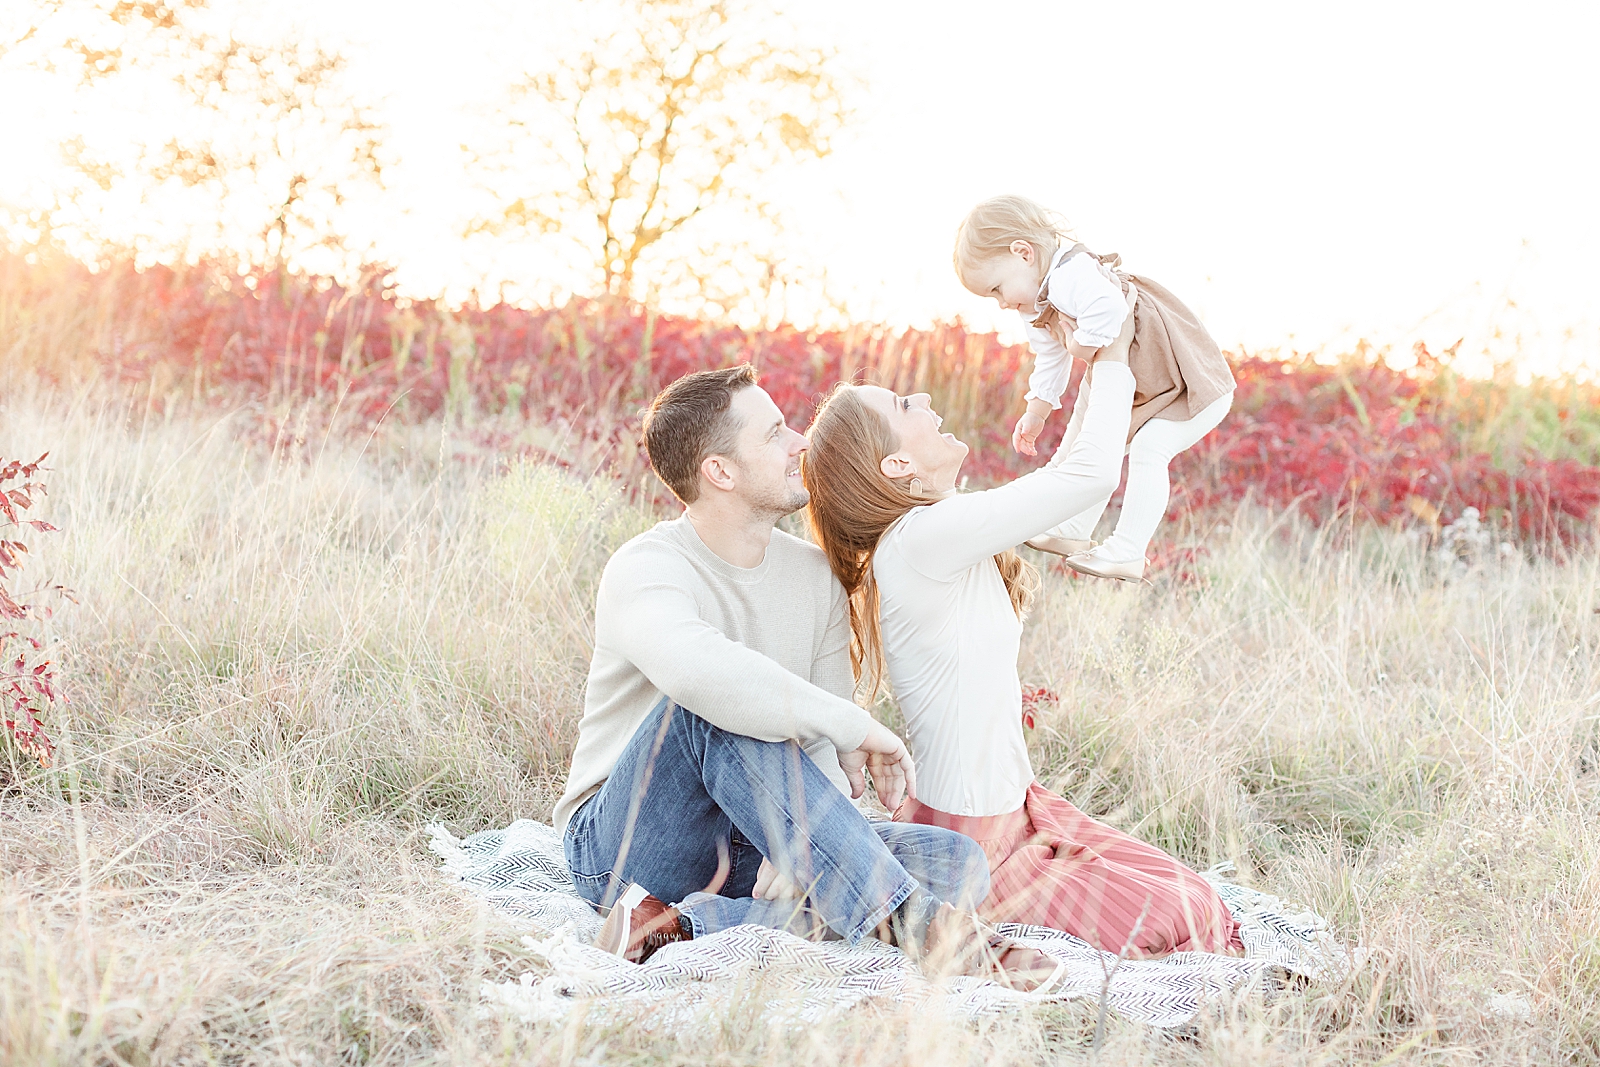 Pulled back family photo of mom and dad sitting on blanket and mom holding toddler daughter up in the air while she laughs mom and dad both looking at her smiling during their fall family session